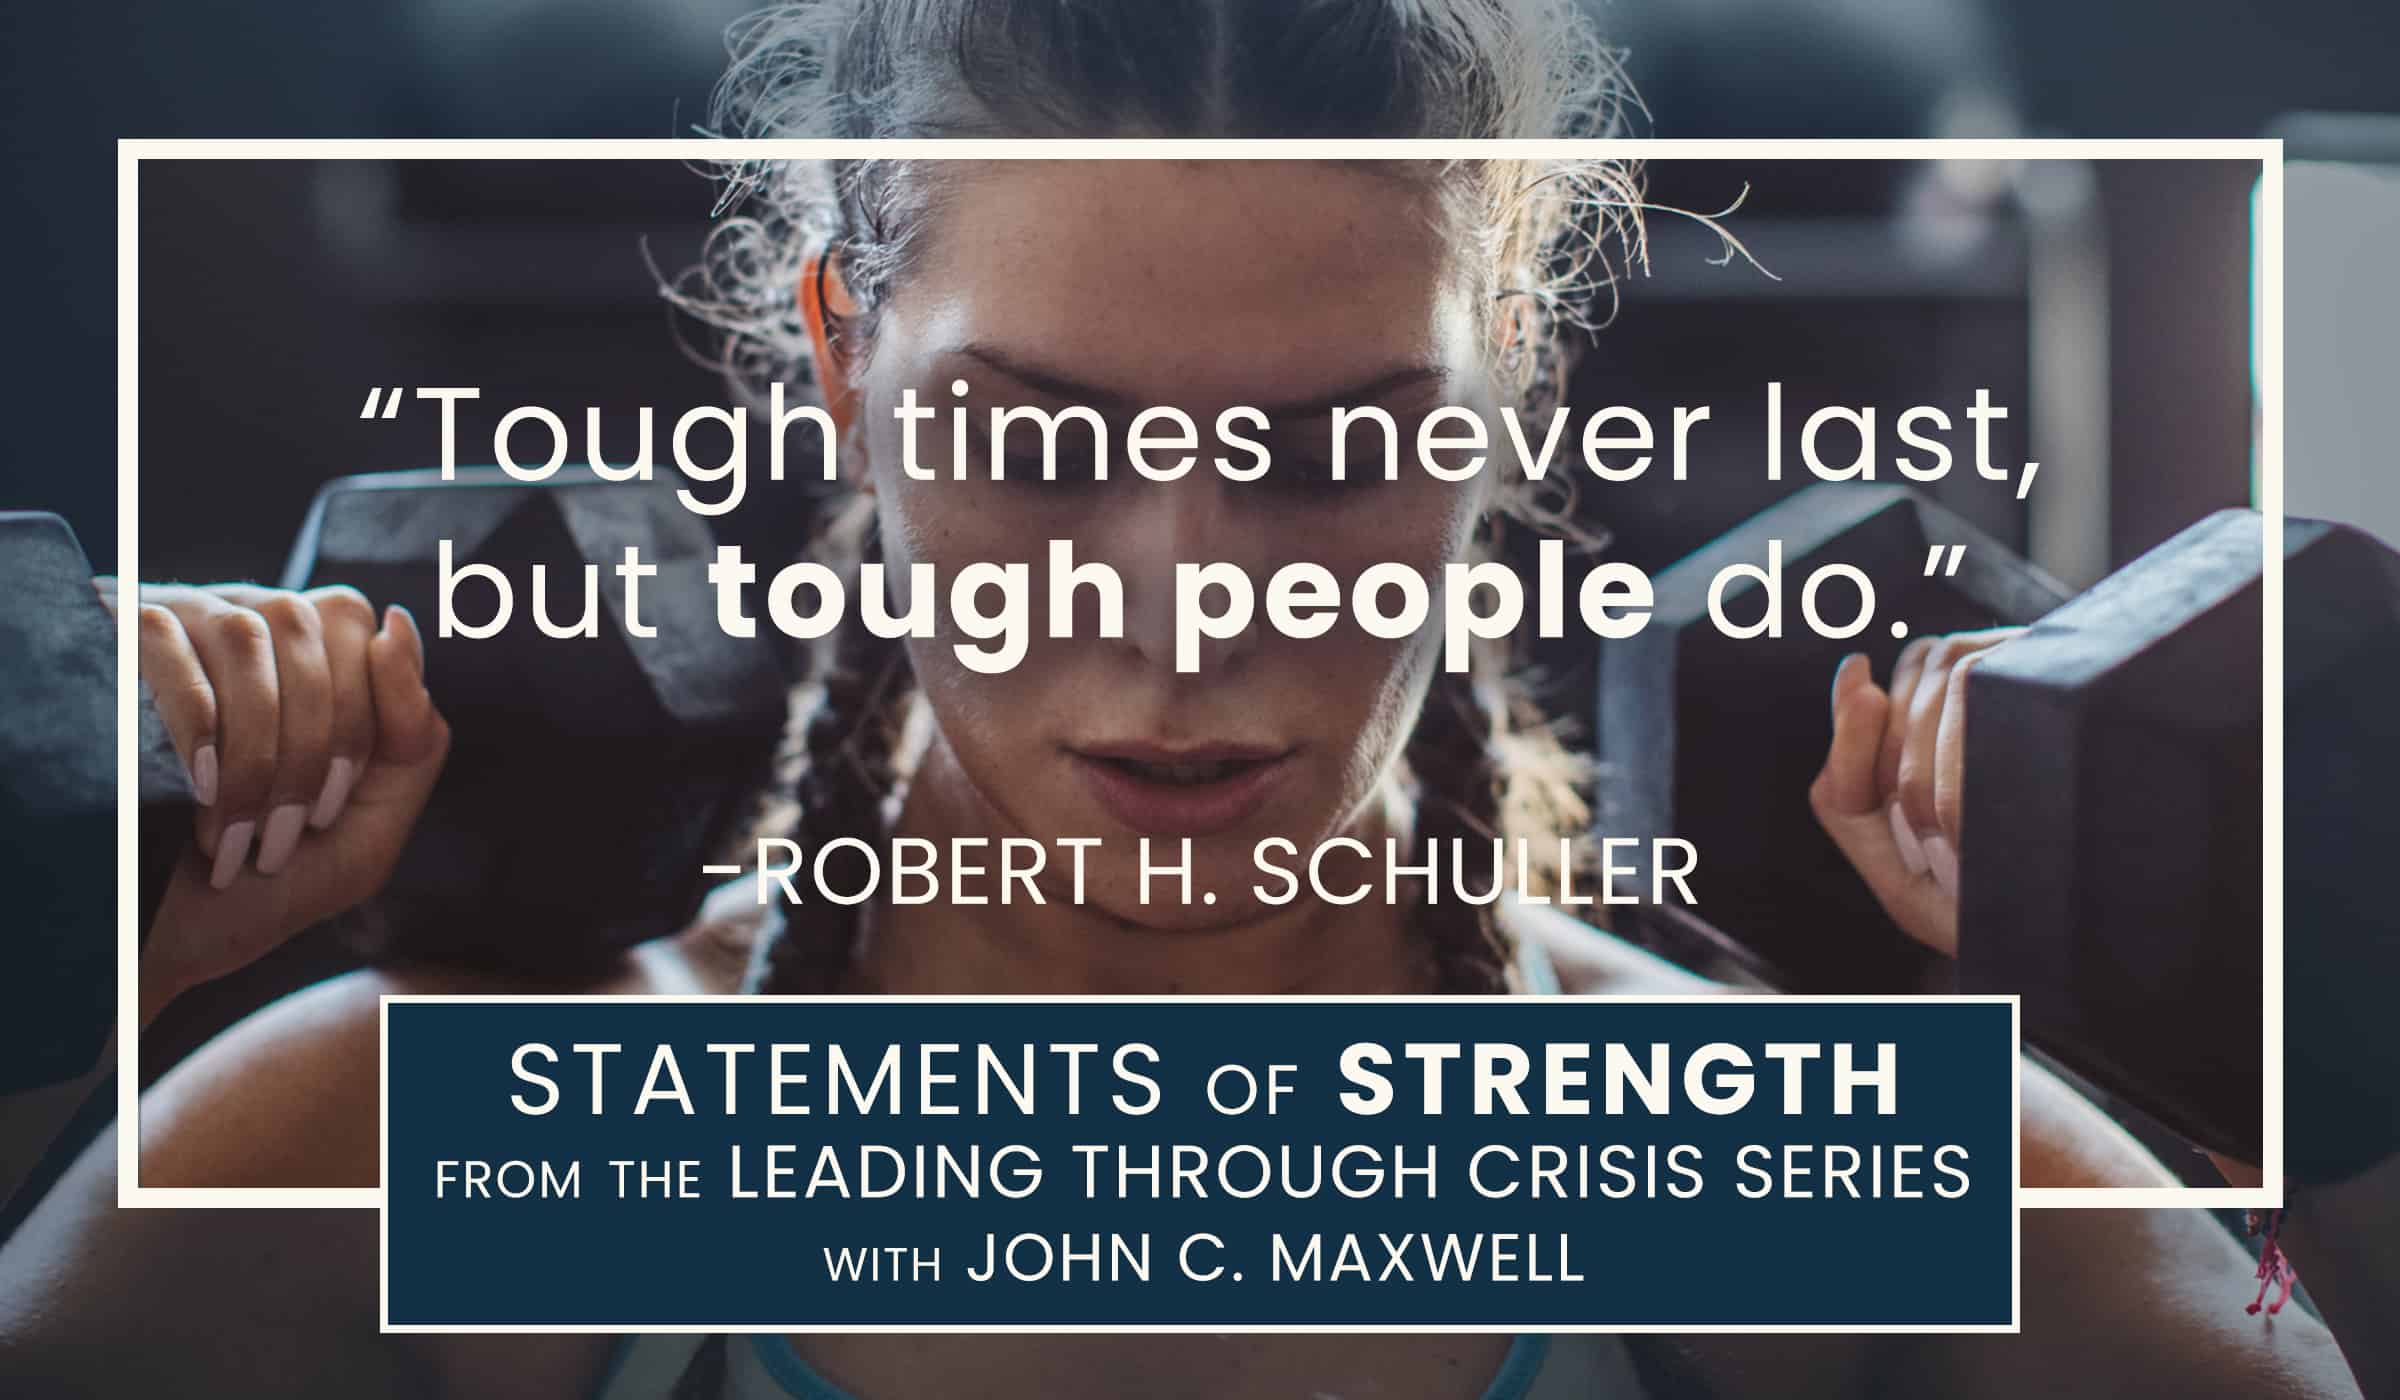 image of quote from robert h schuller